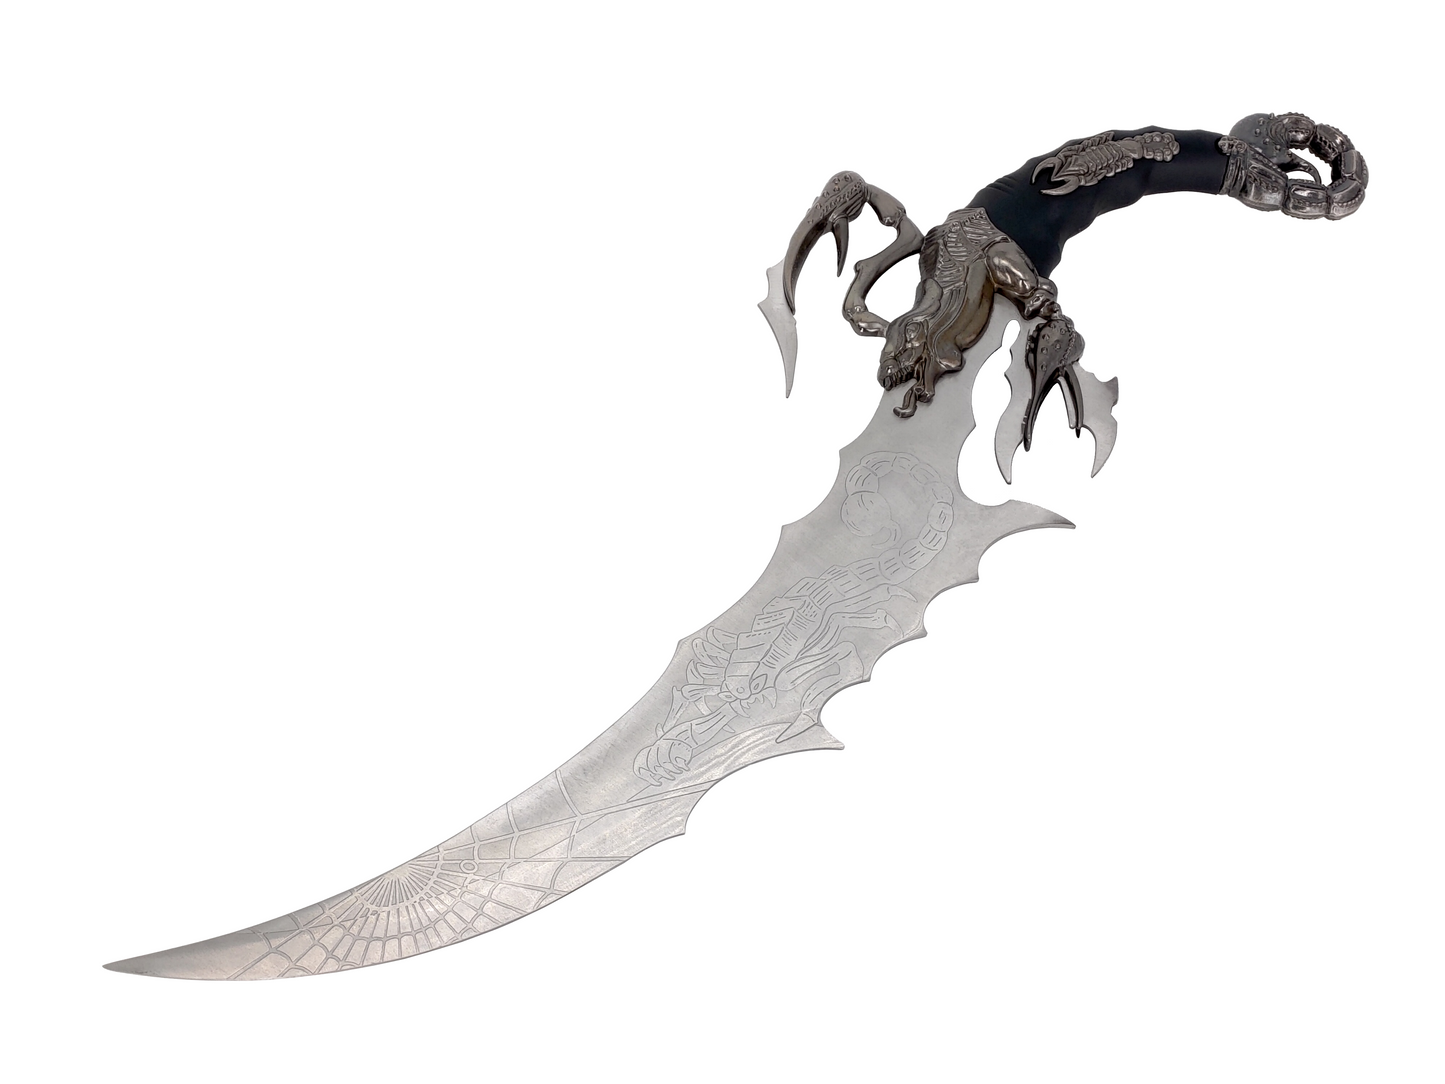 SCORPION FANTASY SWORD WITH STAND